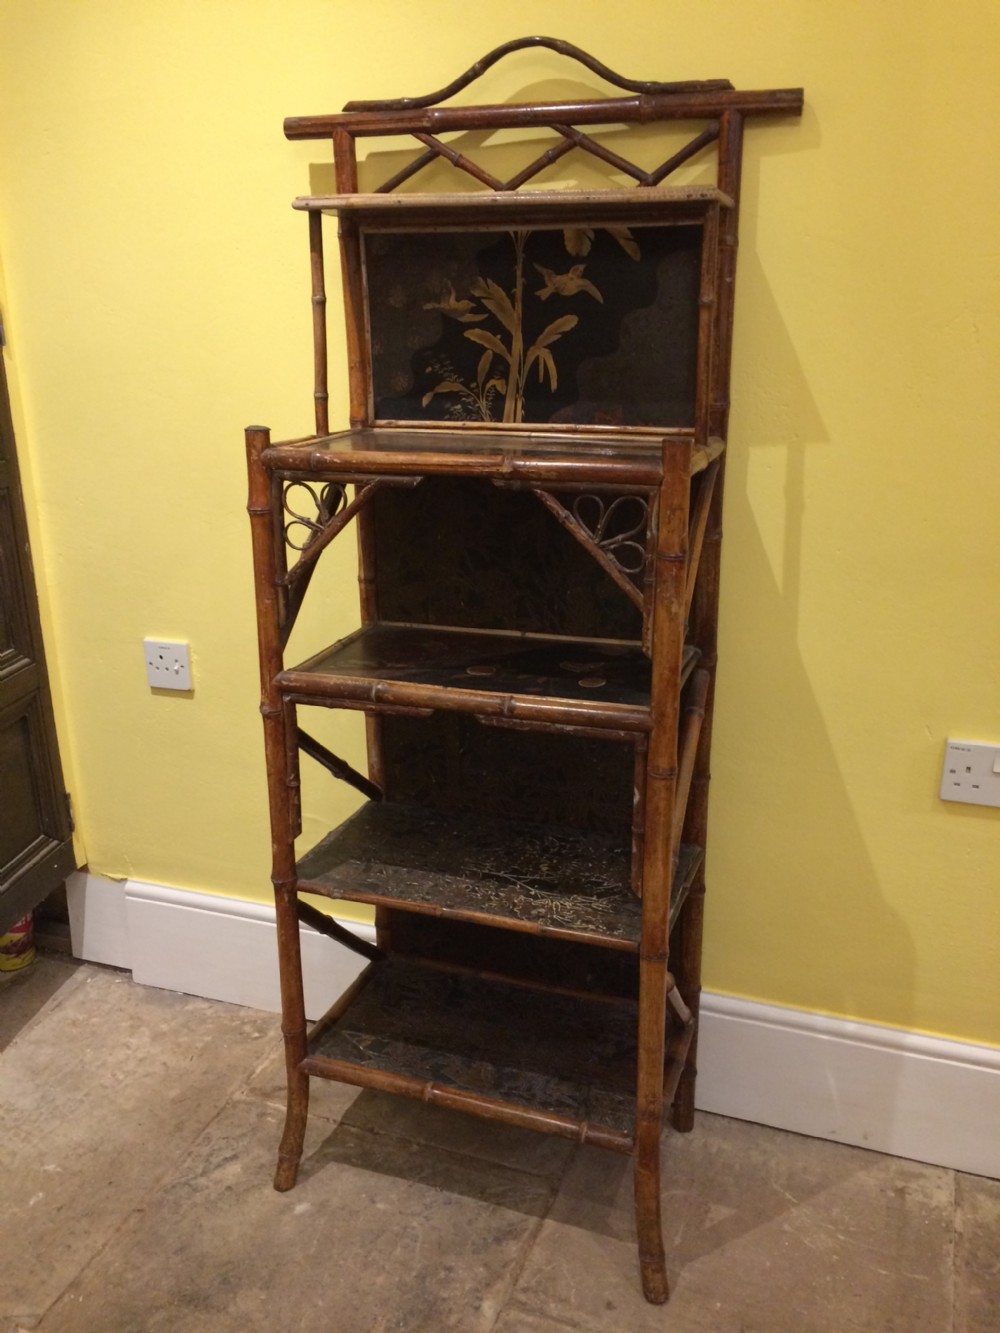 19thc set of 5 tier bamboo shelves with chinoiserie decorations